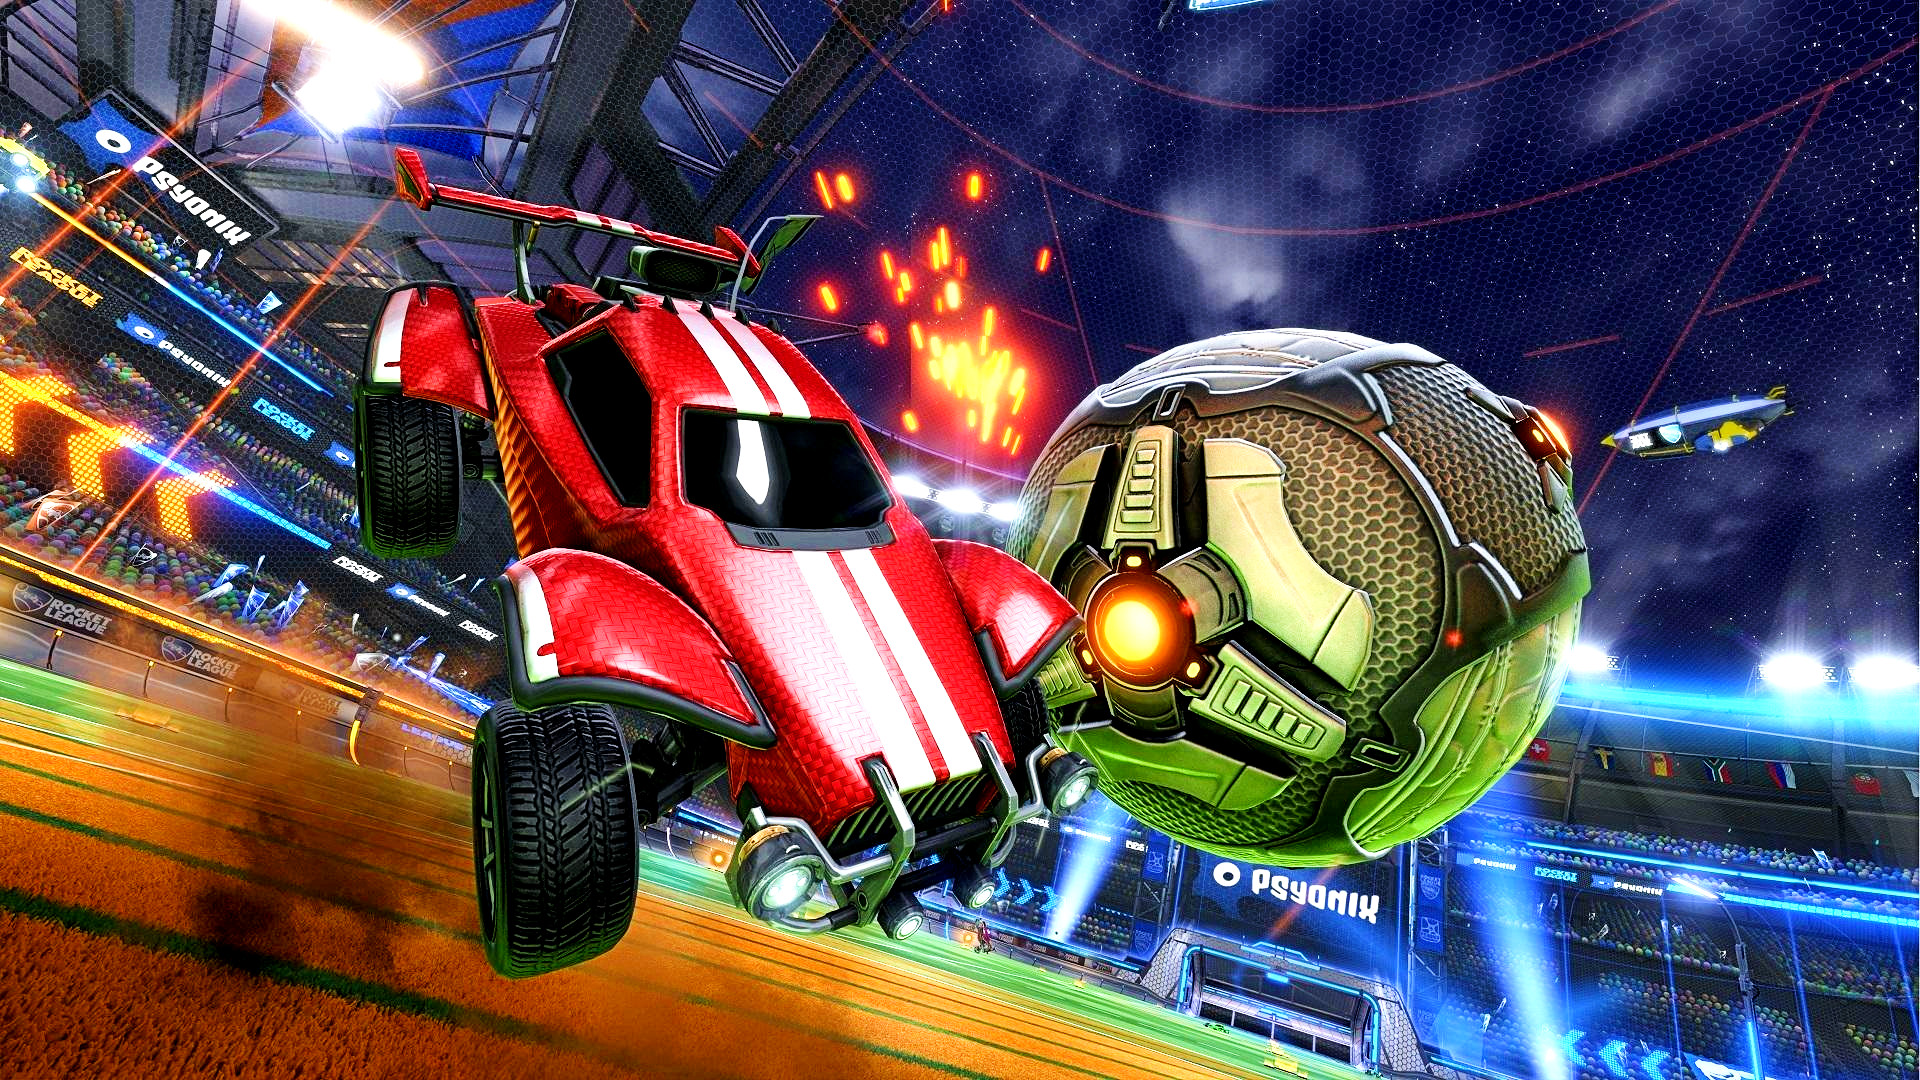 Rocket League - a red car intercepts a large ball in mid-air over a football-style pitch